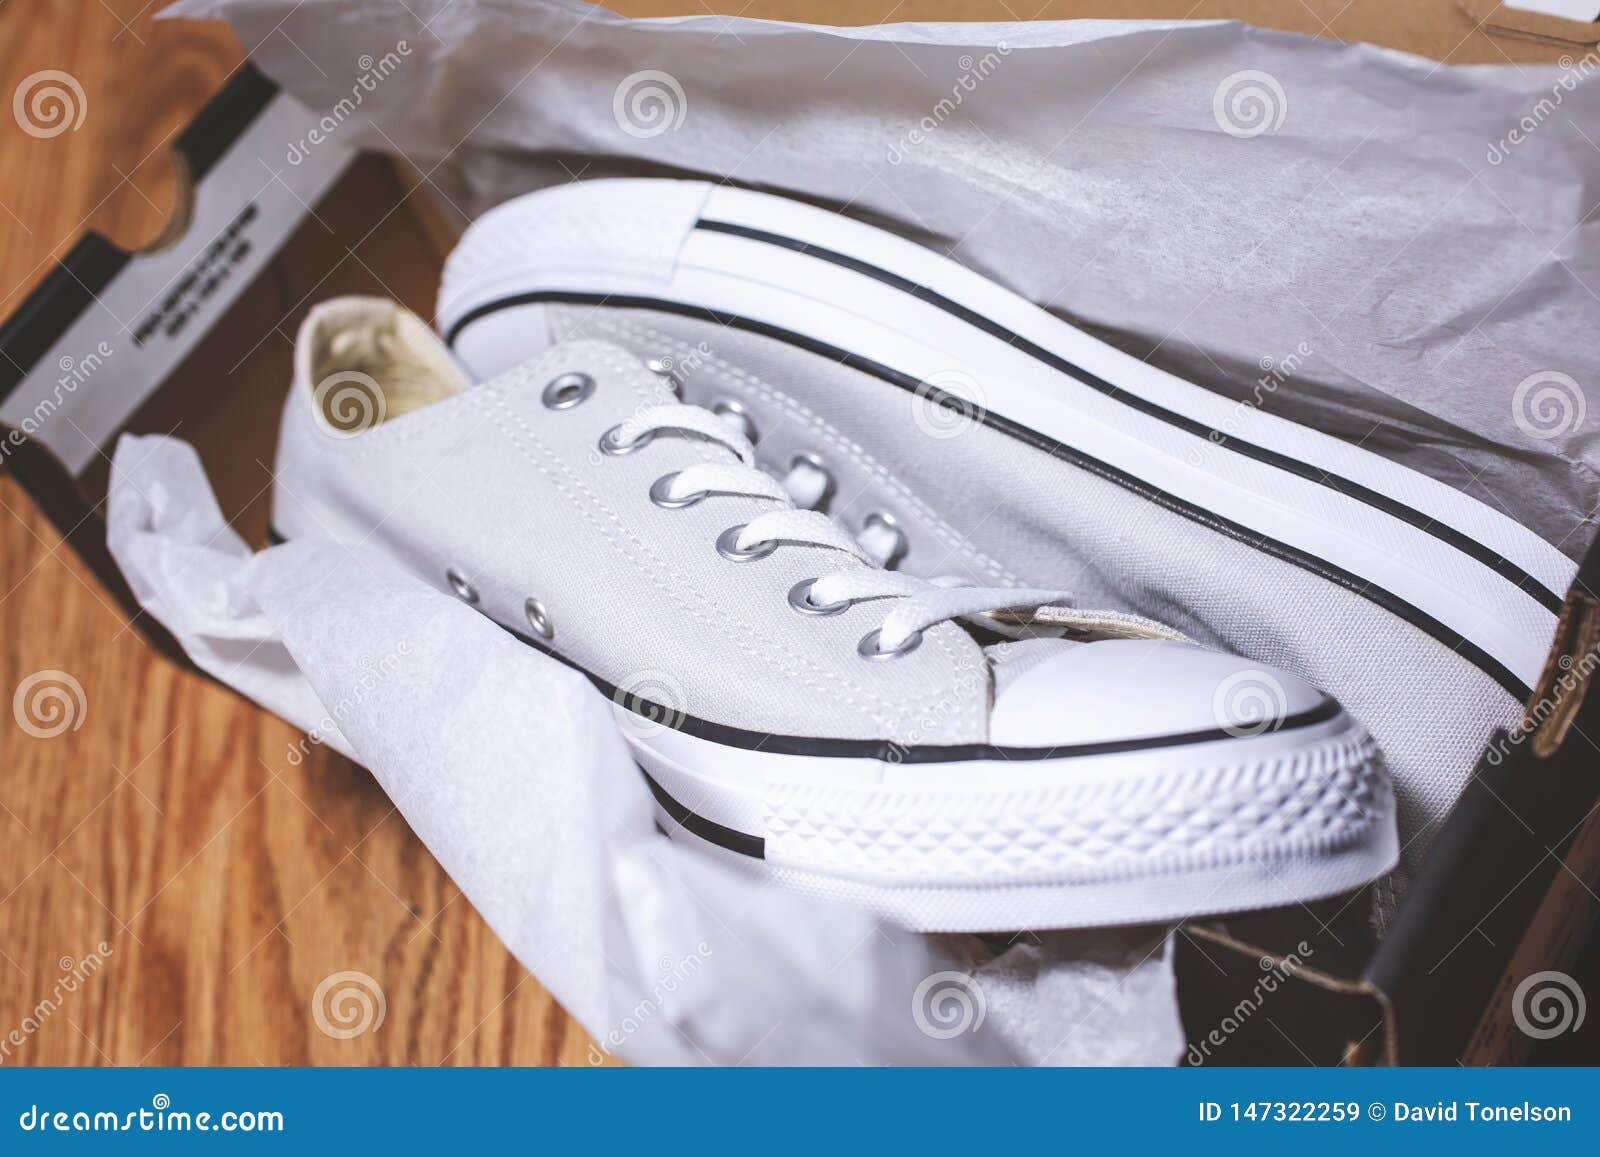 A Pair of Converse Inside the Box Editorial Stock Image - Image of trees,  name: 147322259